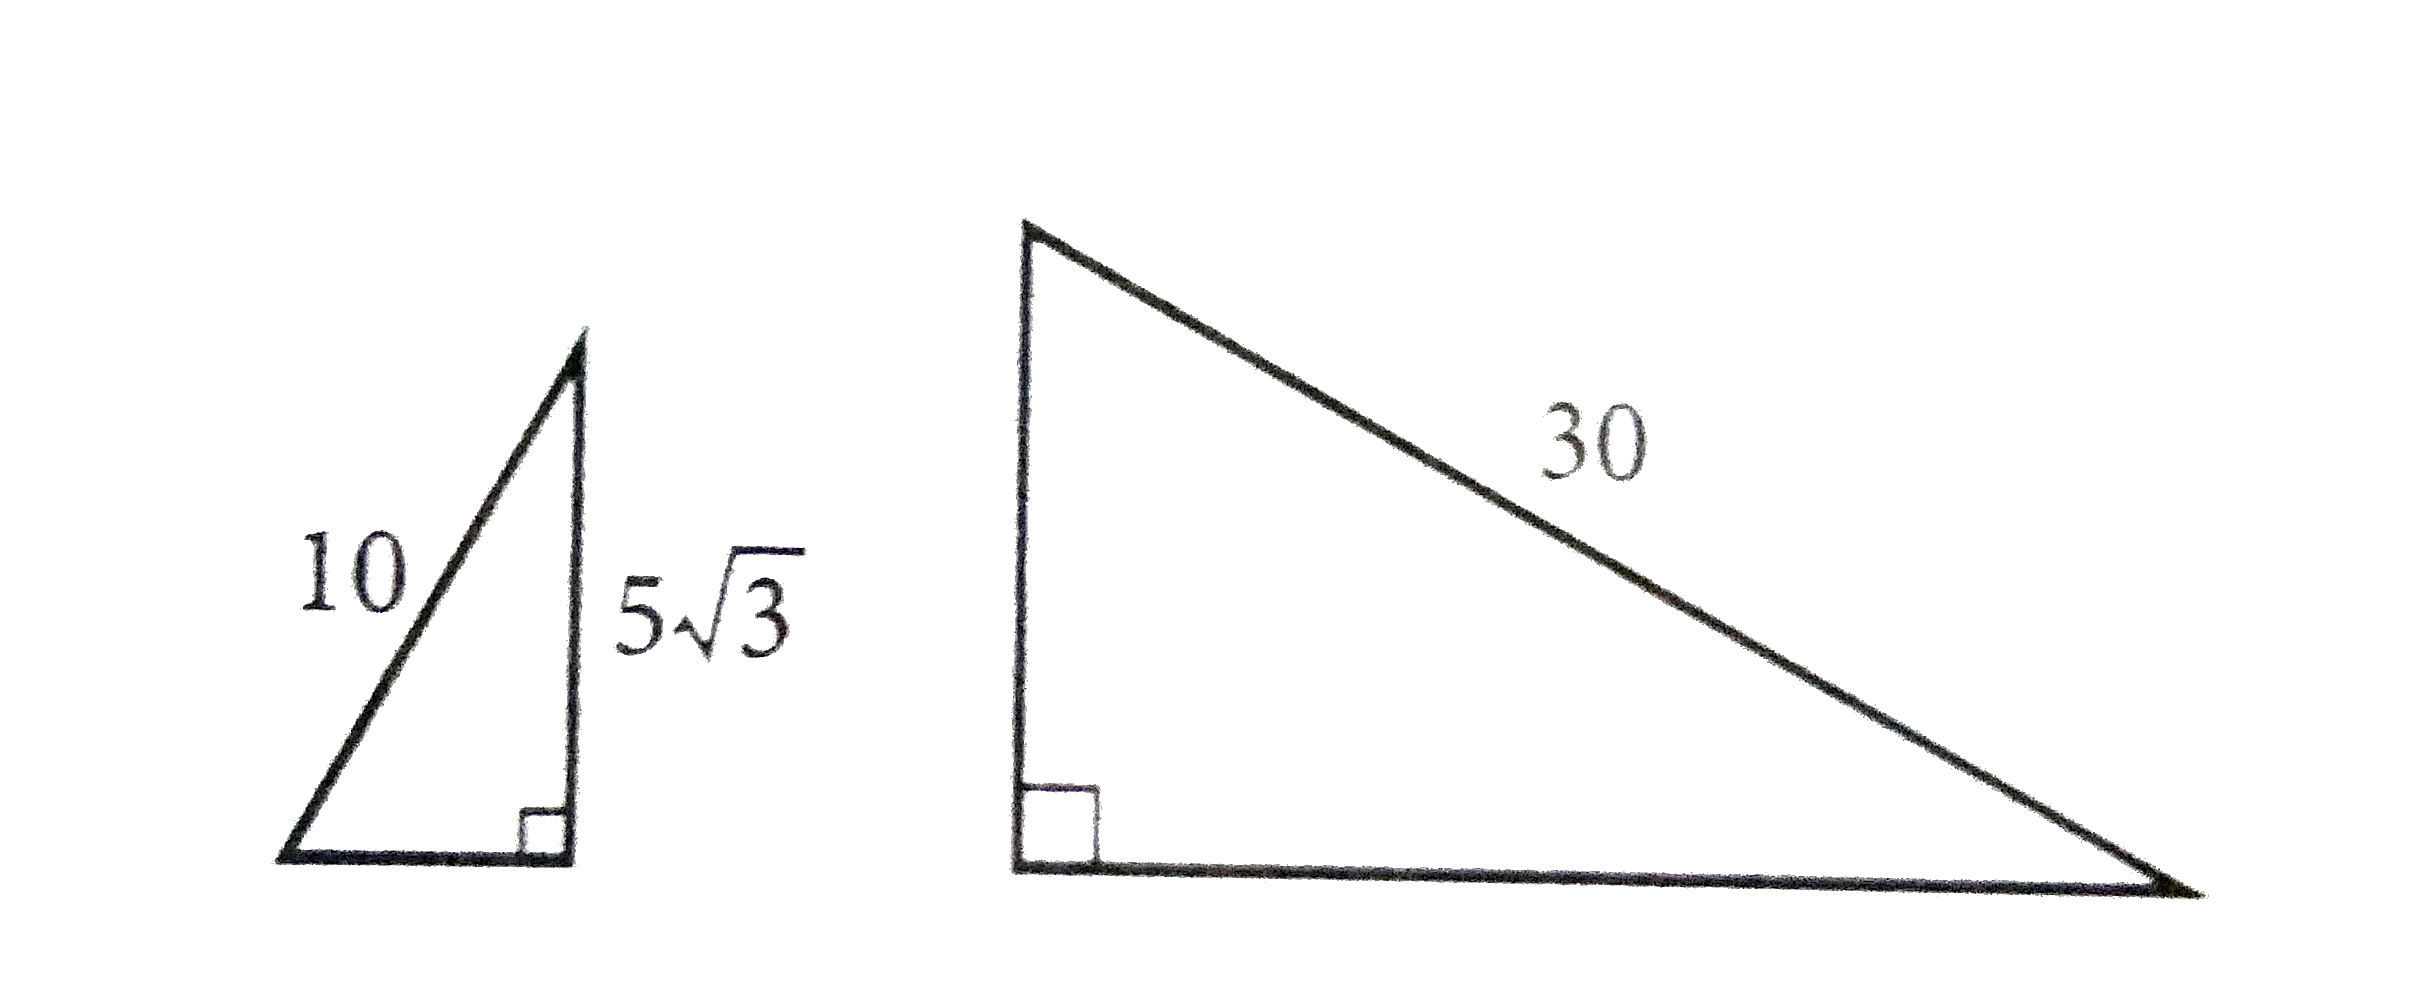 If the right triangle in the figure shown are similar triangle, what is the length of the sorteer leg of the larger triangle?